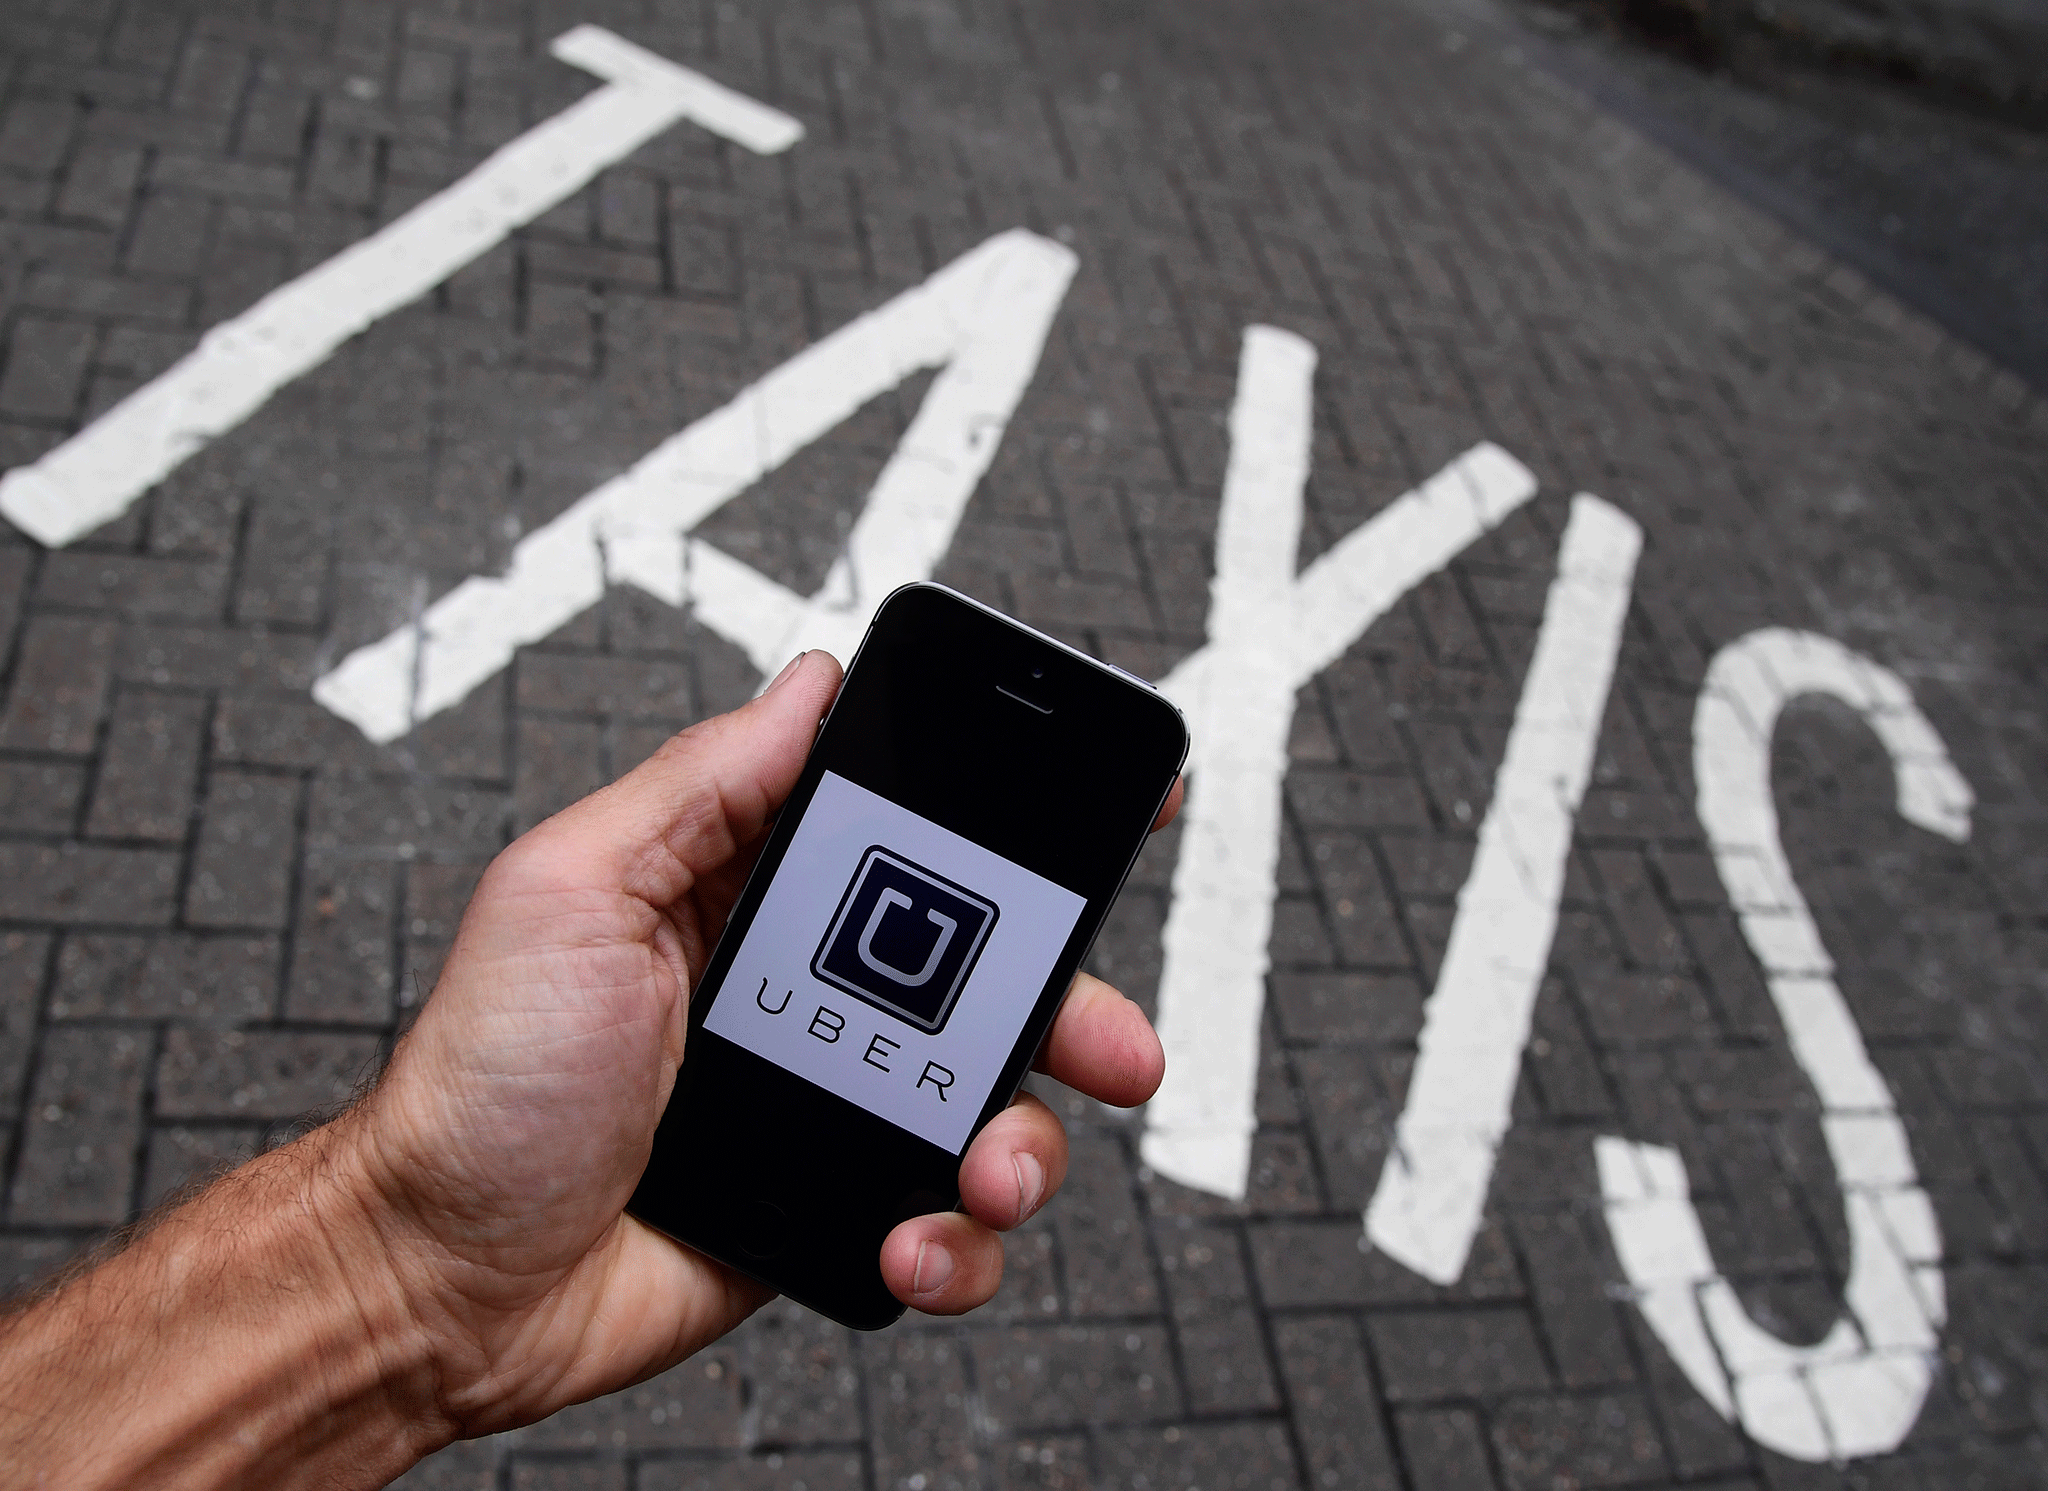 Uber has faced opposition in countries around the world as its rapid expansion has hit established providers